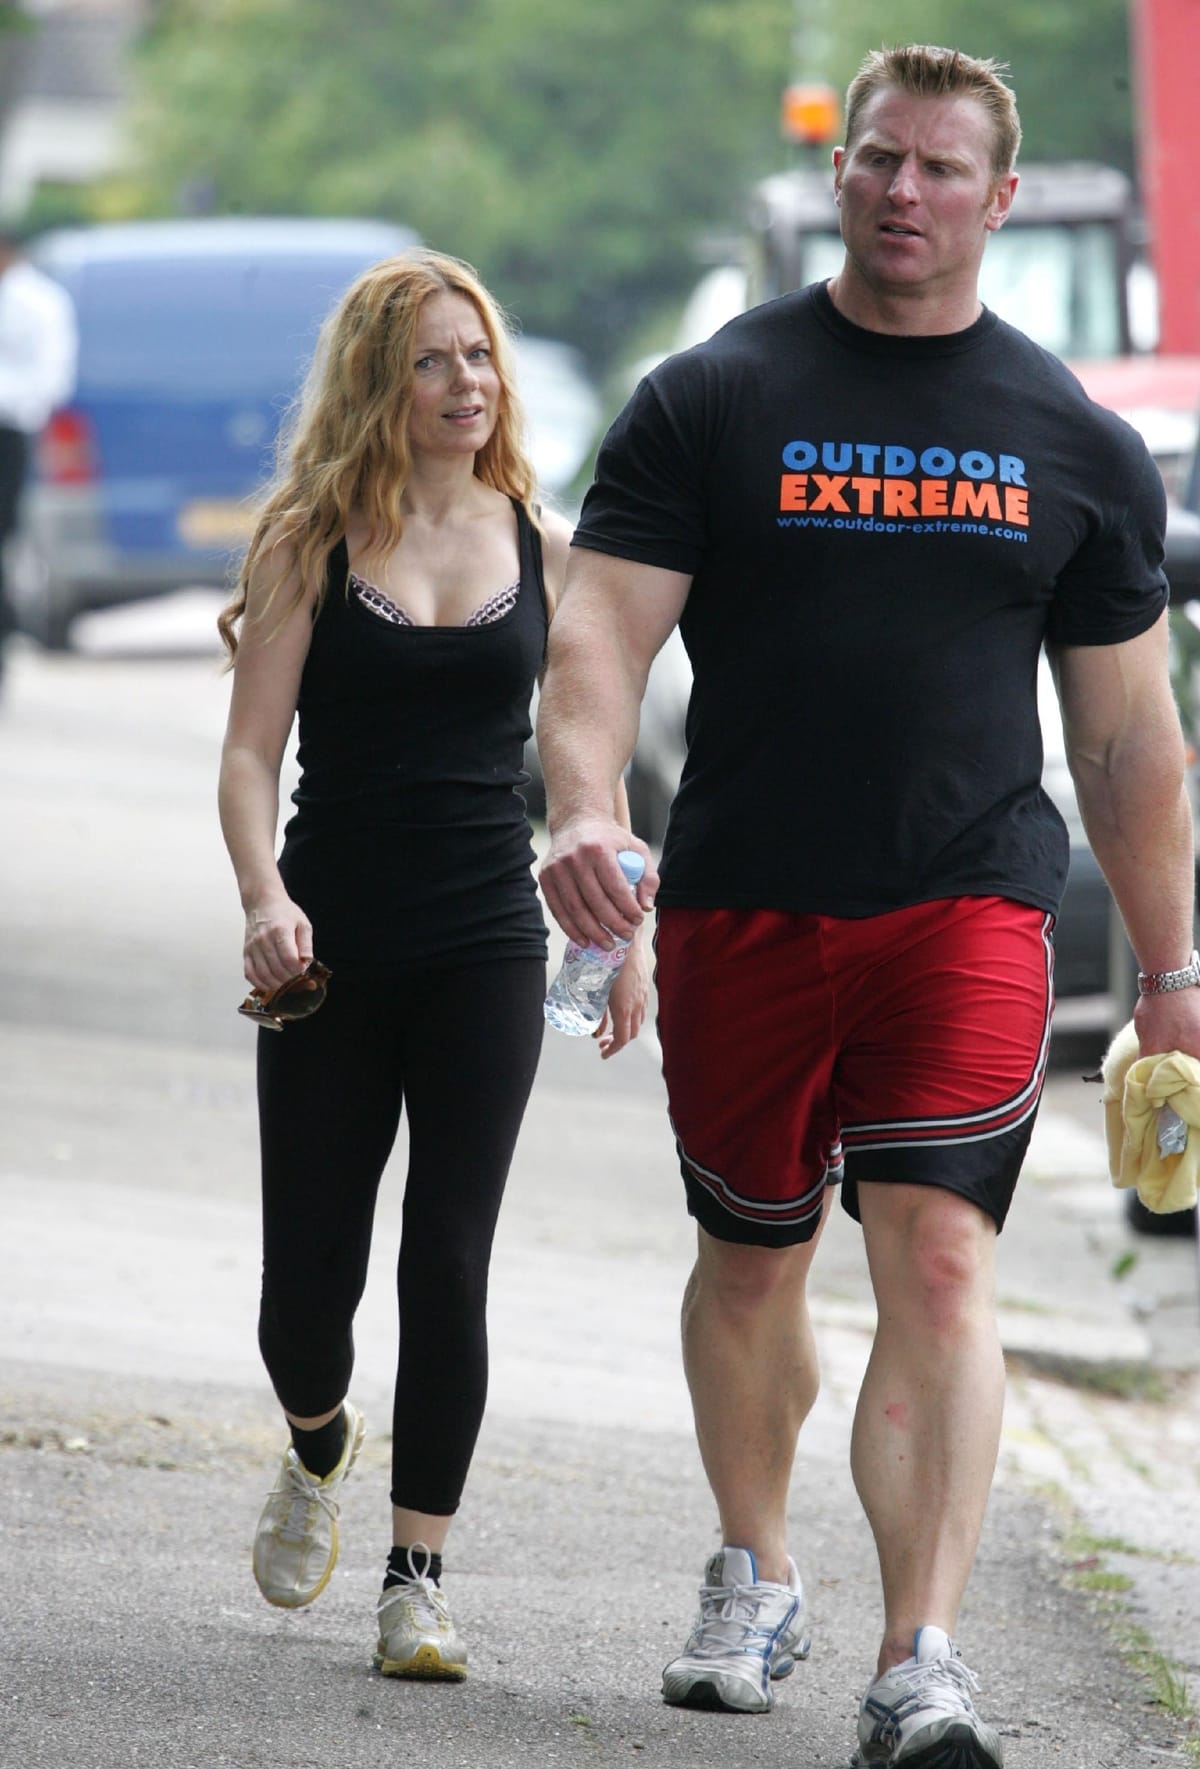 Geri Halliwell looks tiny next to her enormous personal trainer in Hampstead Heath